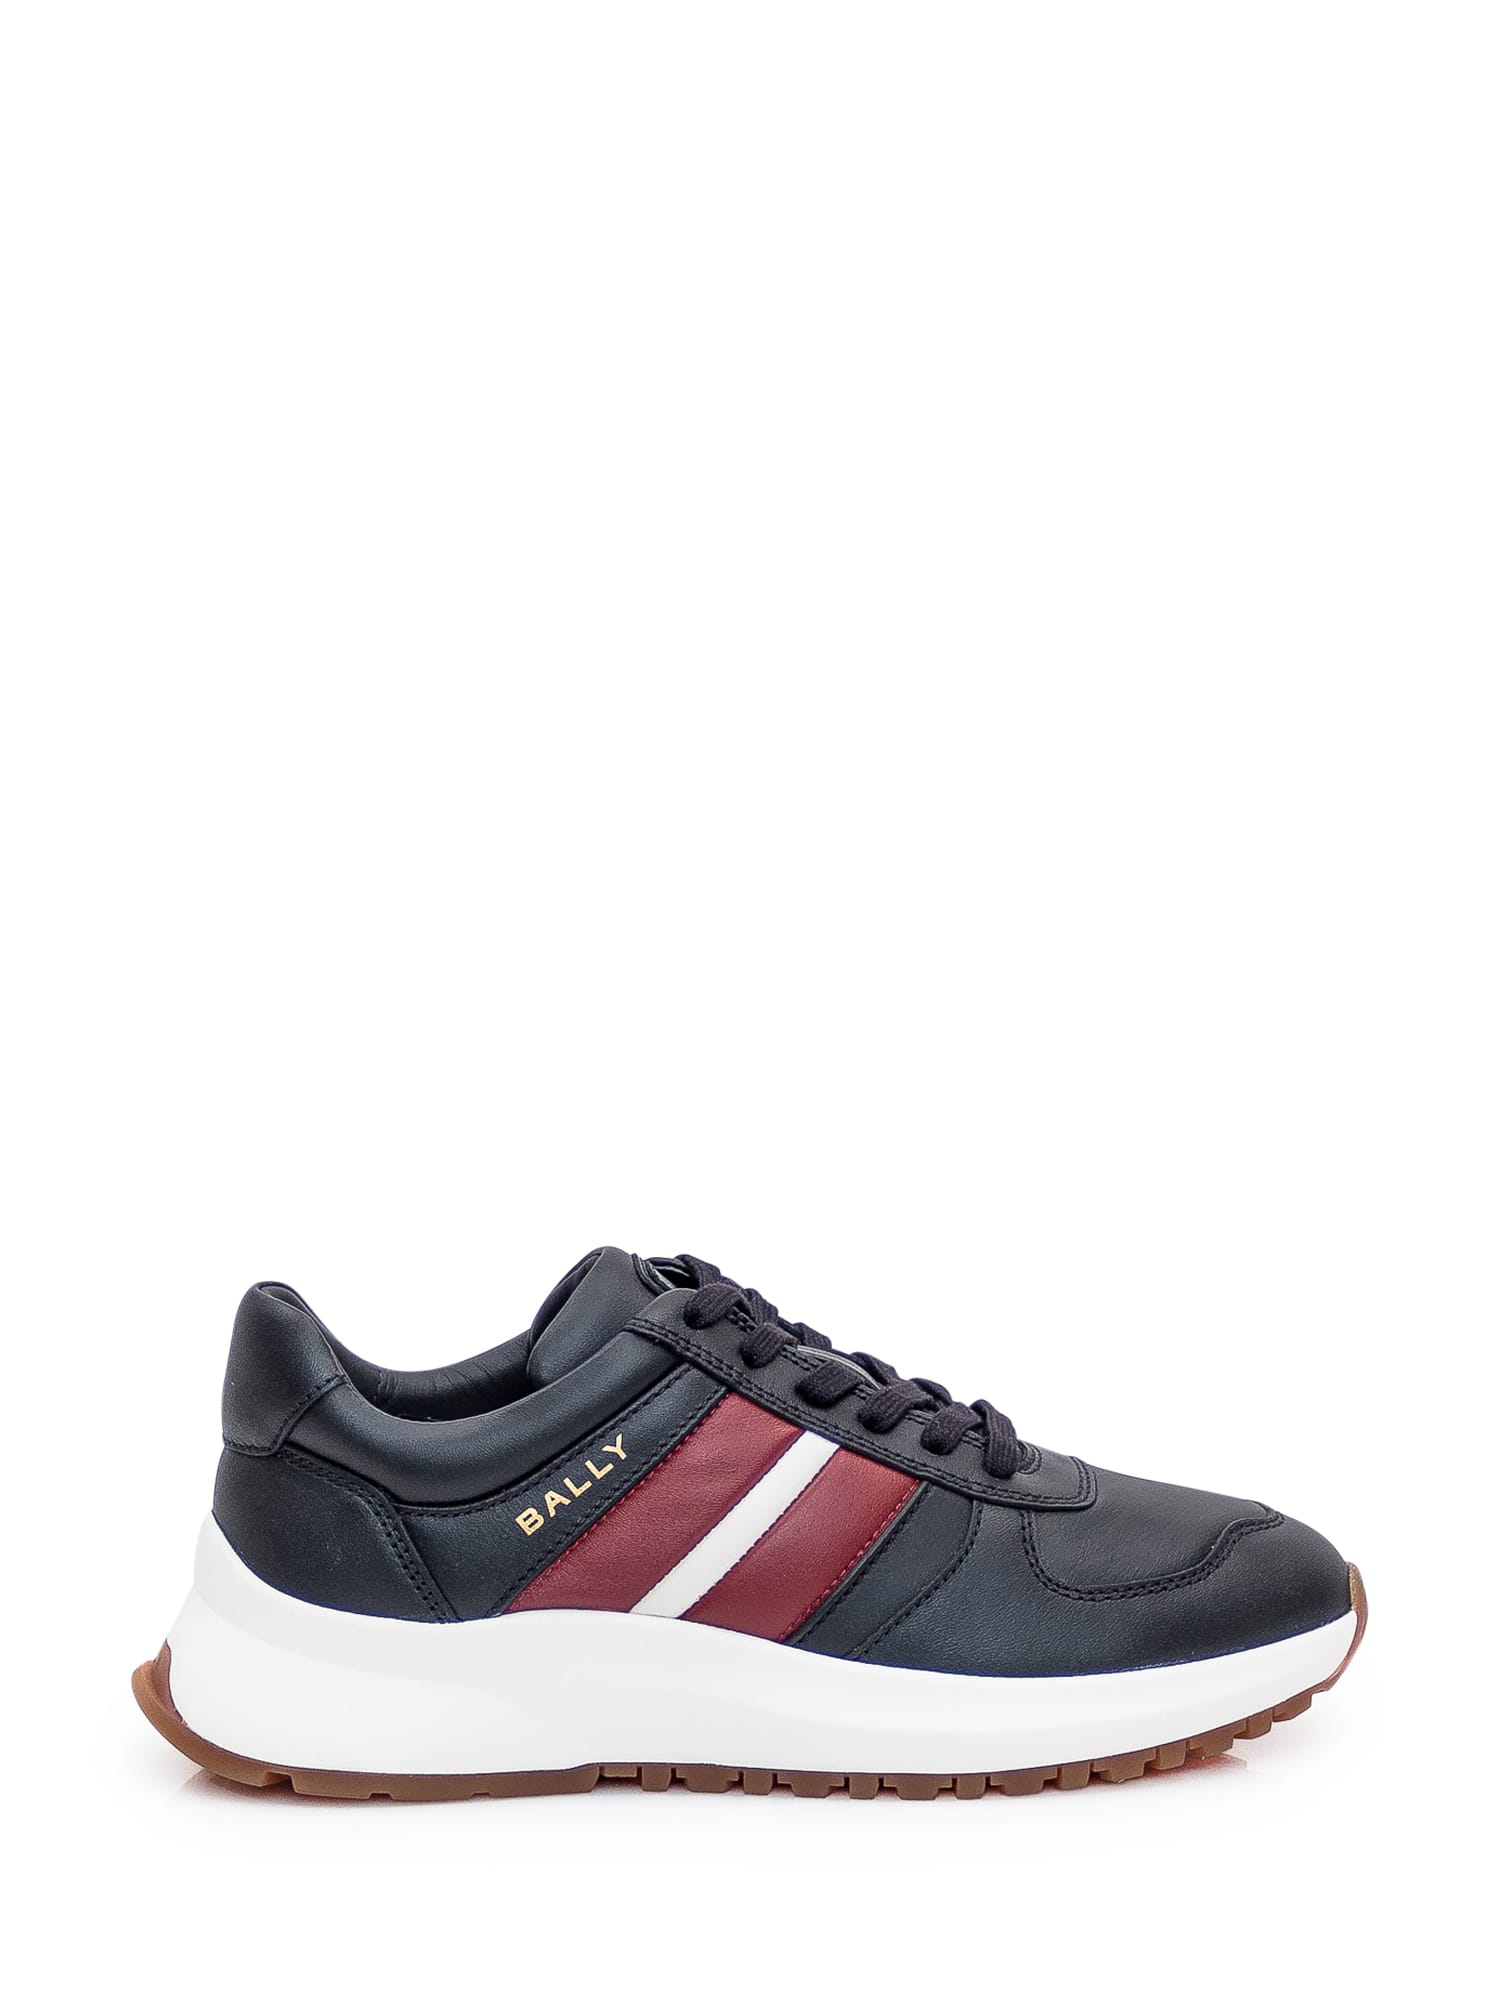 Bally Leather Sneaker In Black/b.red/white